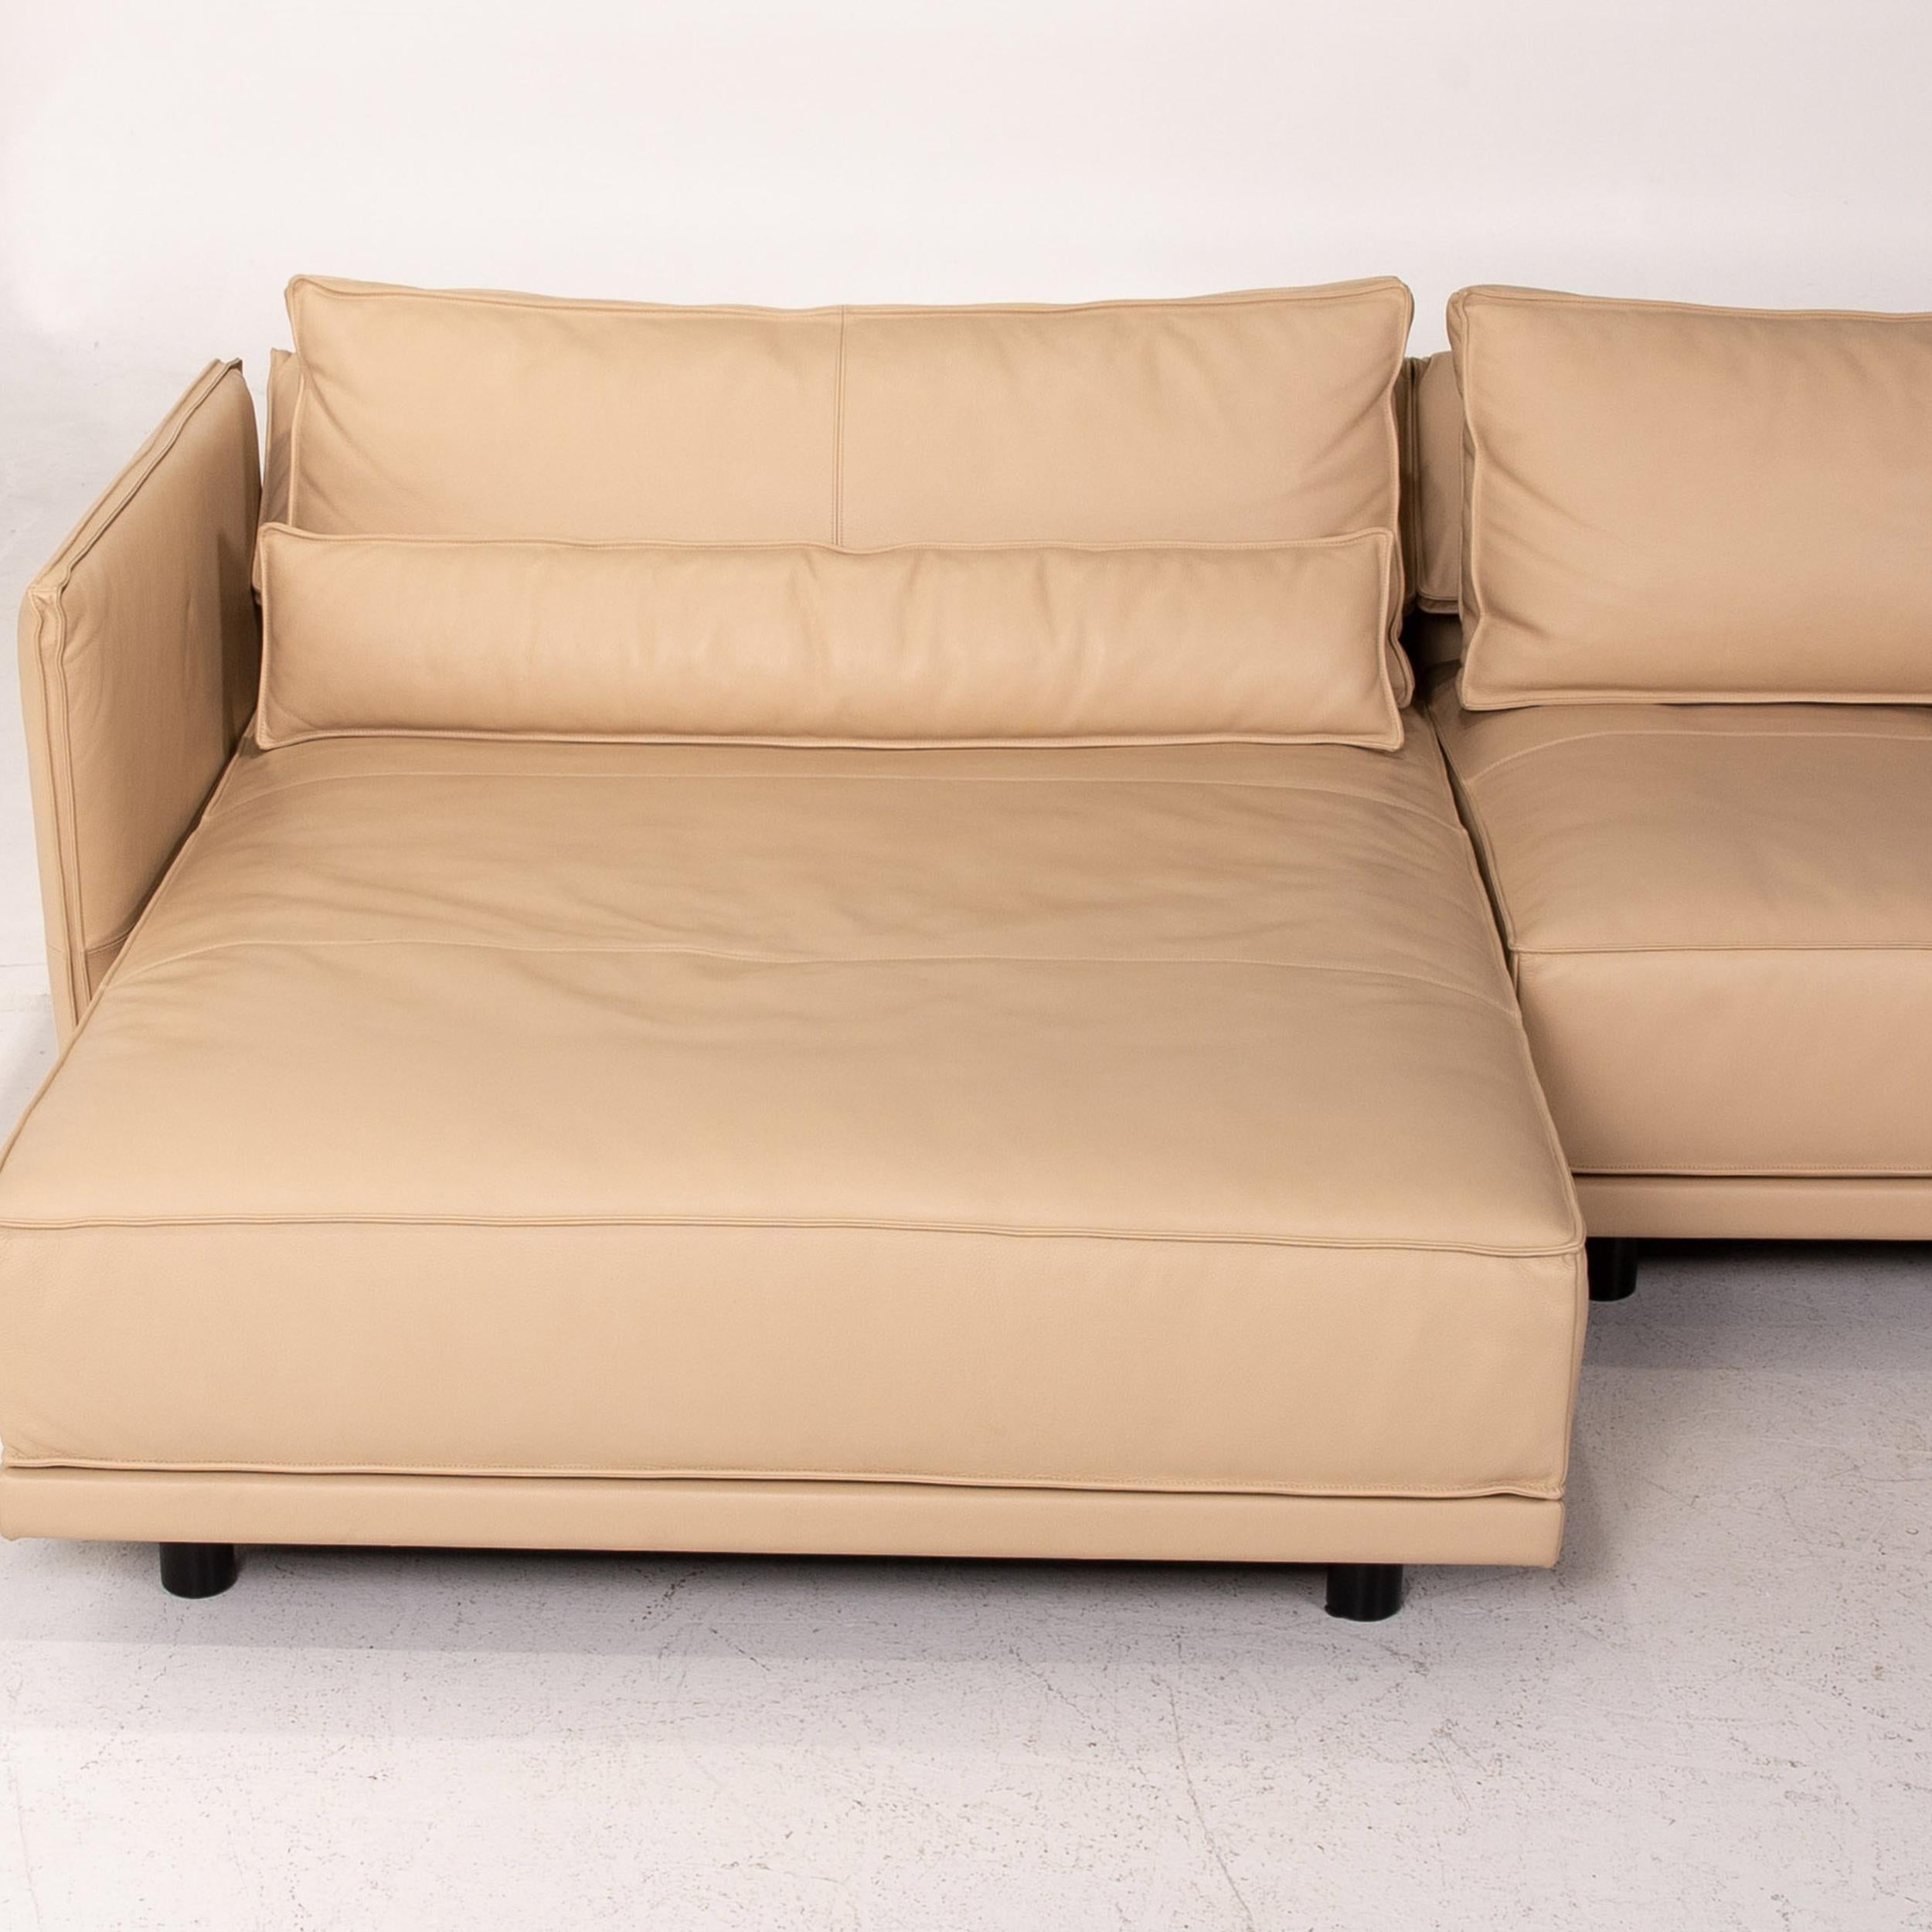 IP Design Cube Lounge Leather Corner Sofa Beige Sofa Couch In Excellent Condition For Sale In Cologne, DE